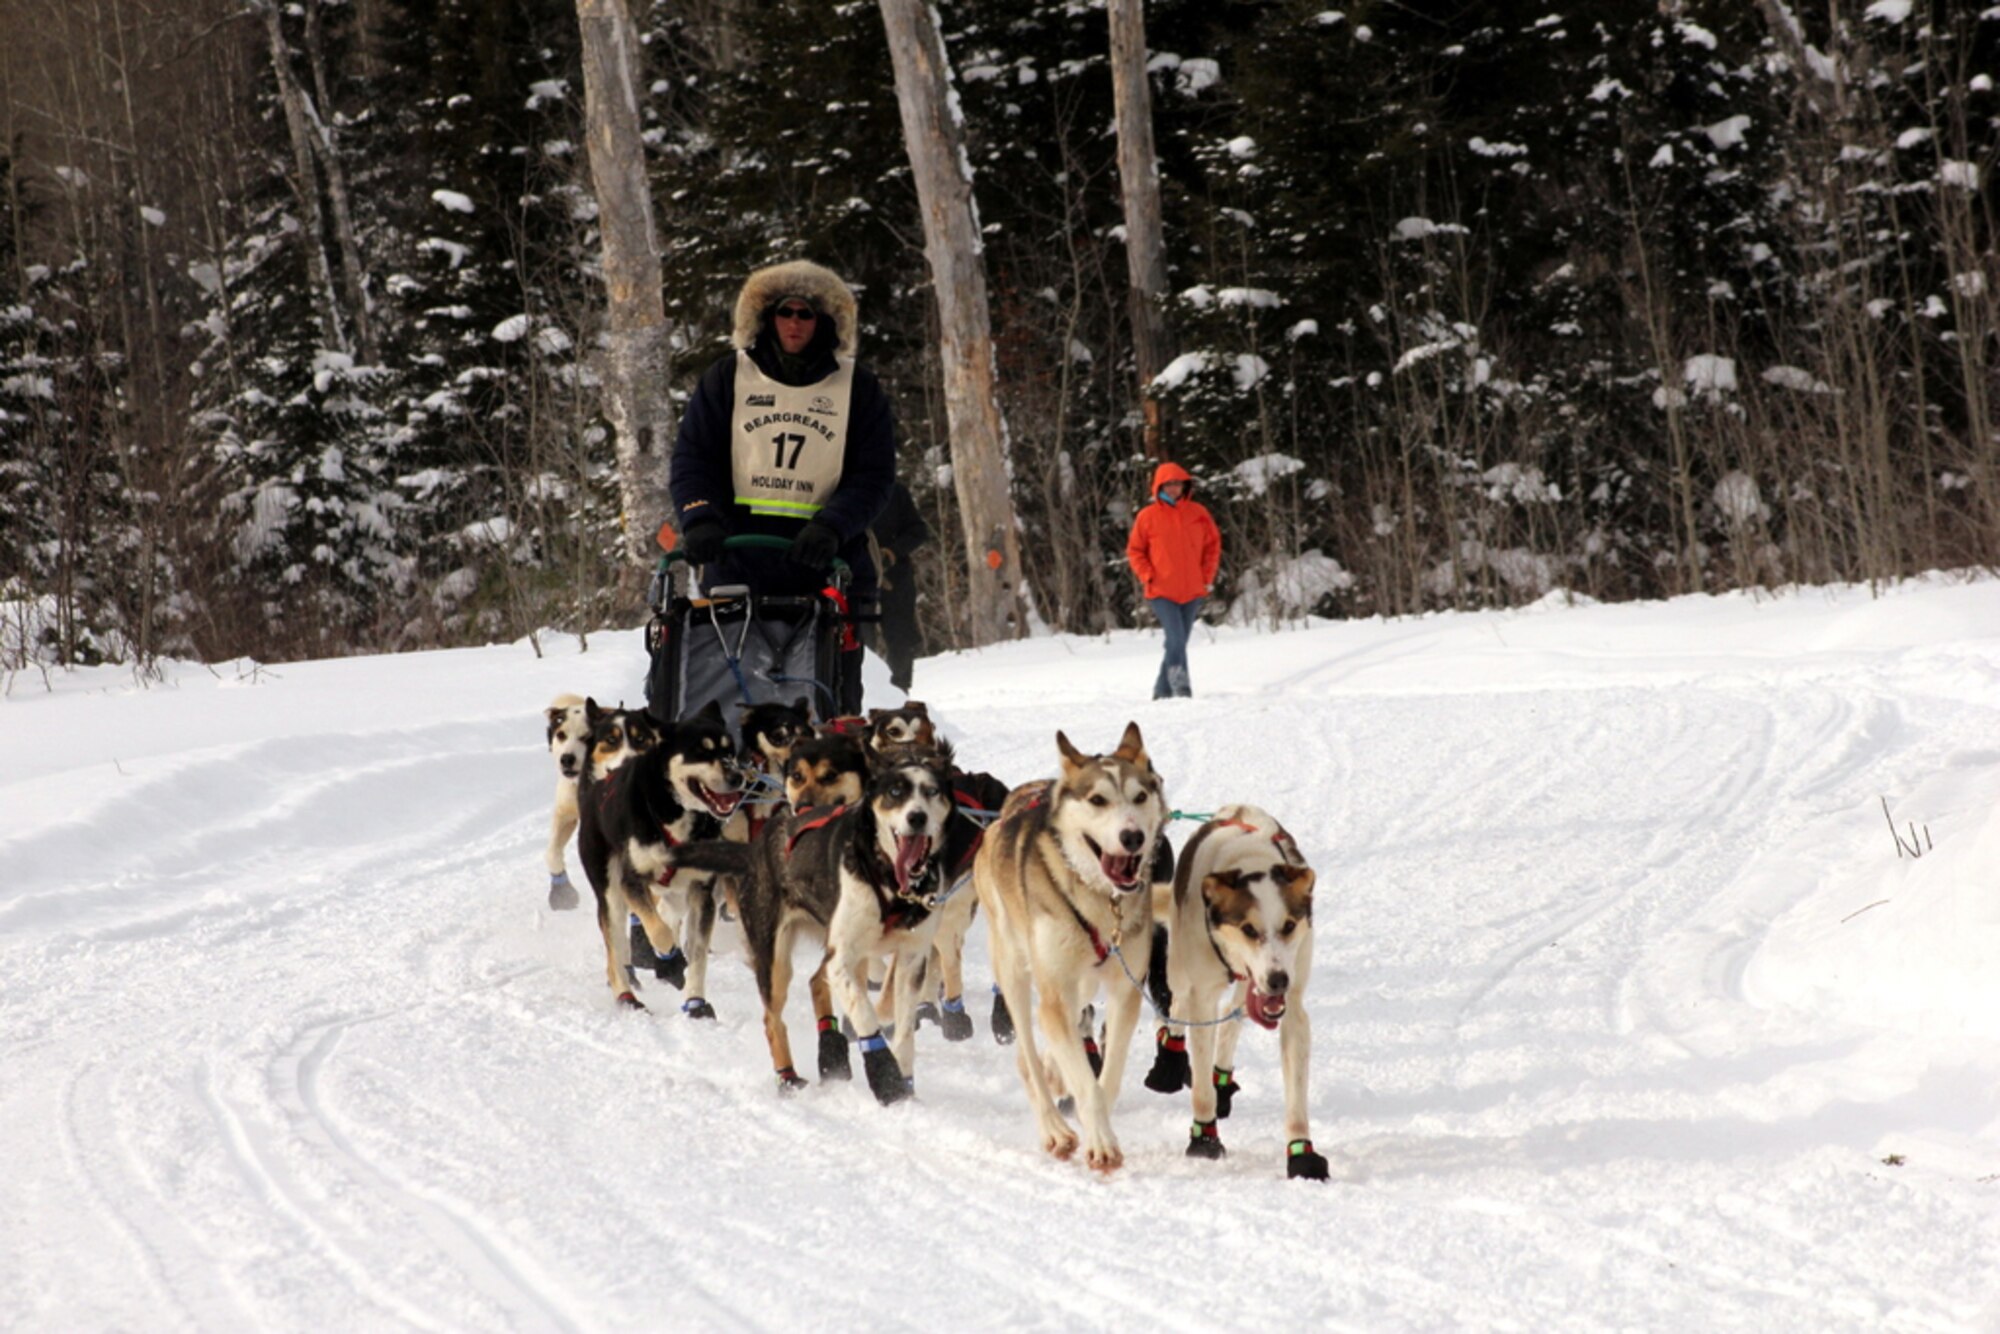 A John Beargrease Sled Dog Marathon competitor is seen crossing the checkpoint of the 148th Fighter Wing, Communications Flight, Deployable Interoperable Communications Element (DICE) team.  The 148th Communications Flight has been supporting the Beargrease Sled Dog Marathon since 1995.  U.S. Air Force photo by MSgt Richard Kaufman.  (Released)

